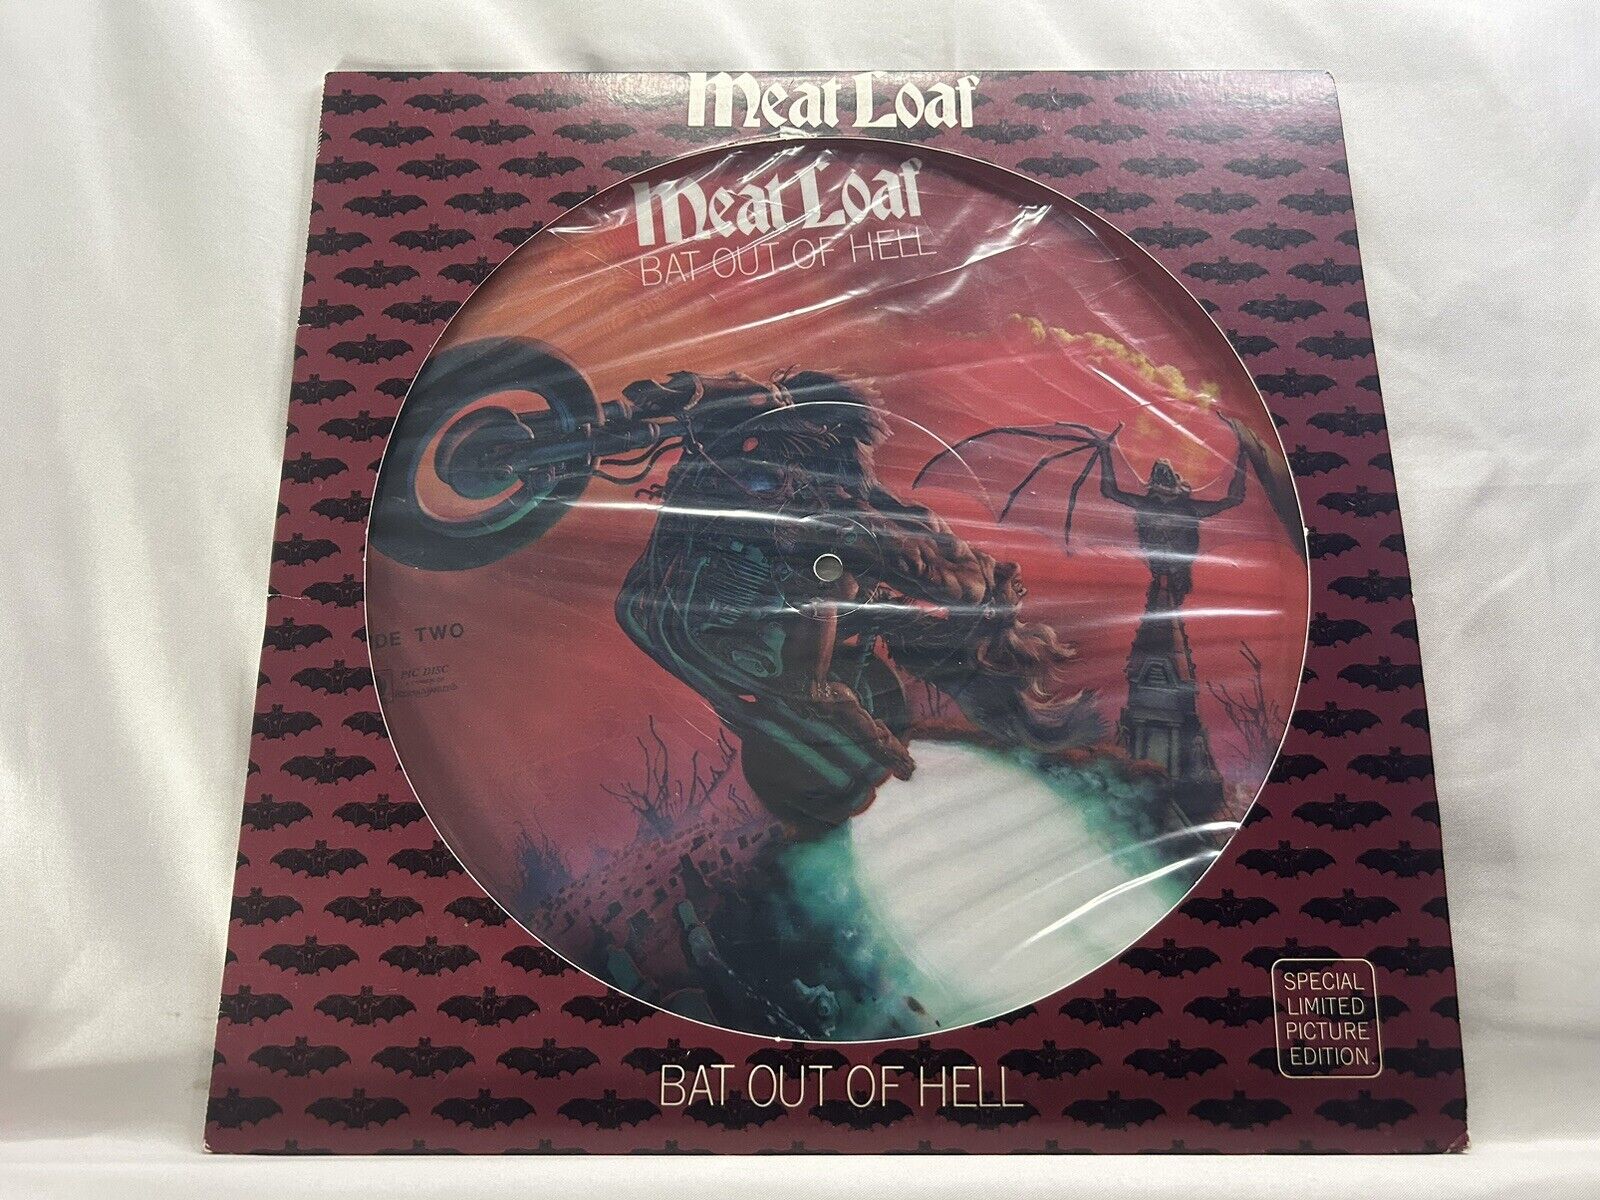 Meat Loaf Bat Out Of Hell E99 34974 Limited Edition Picture Discs Tested EX EX